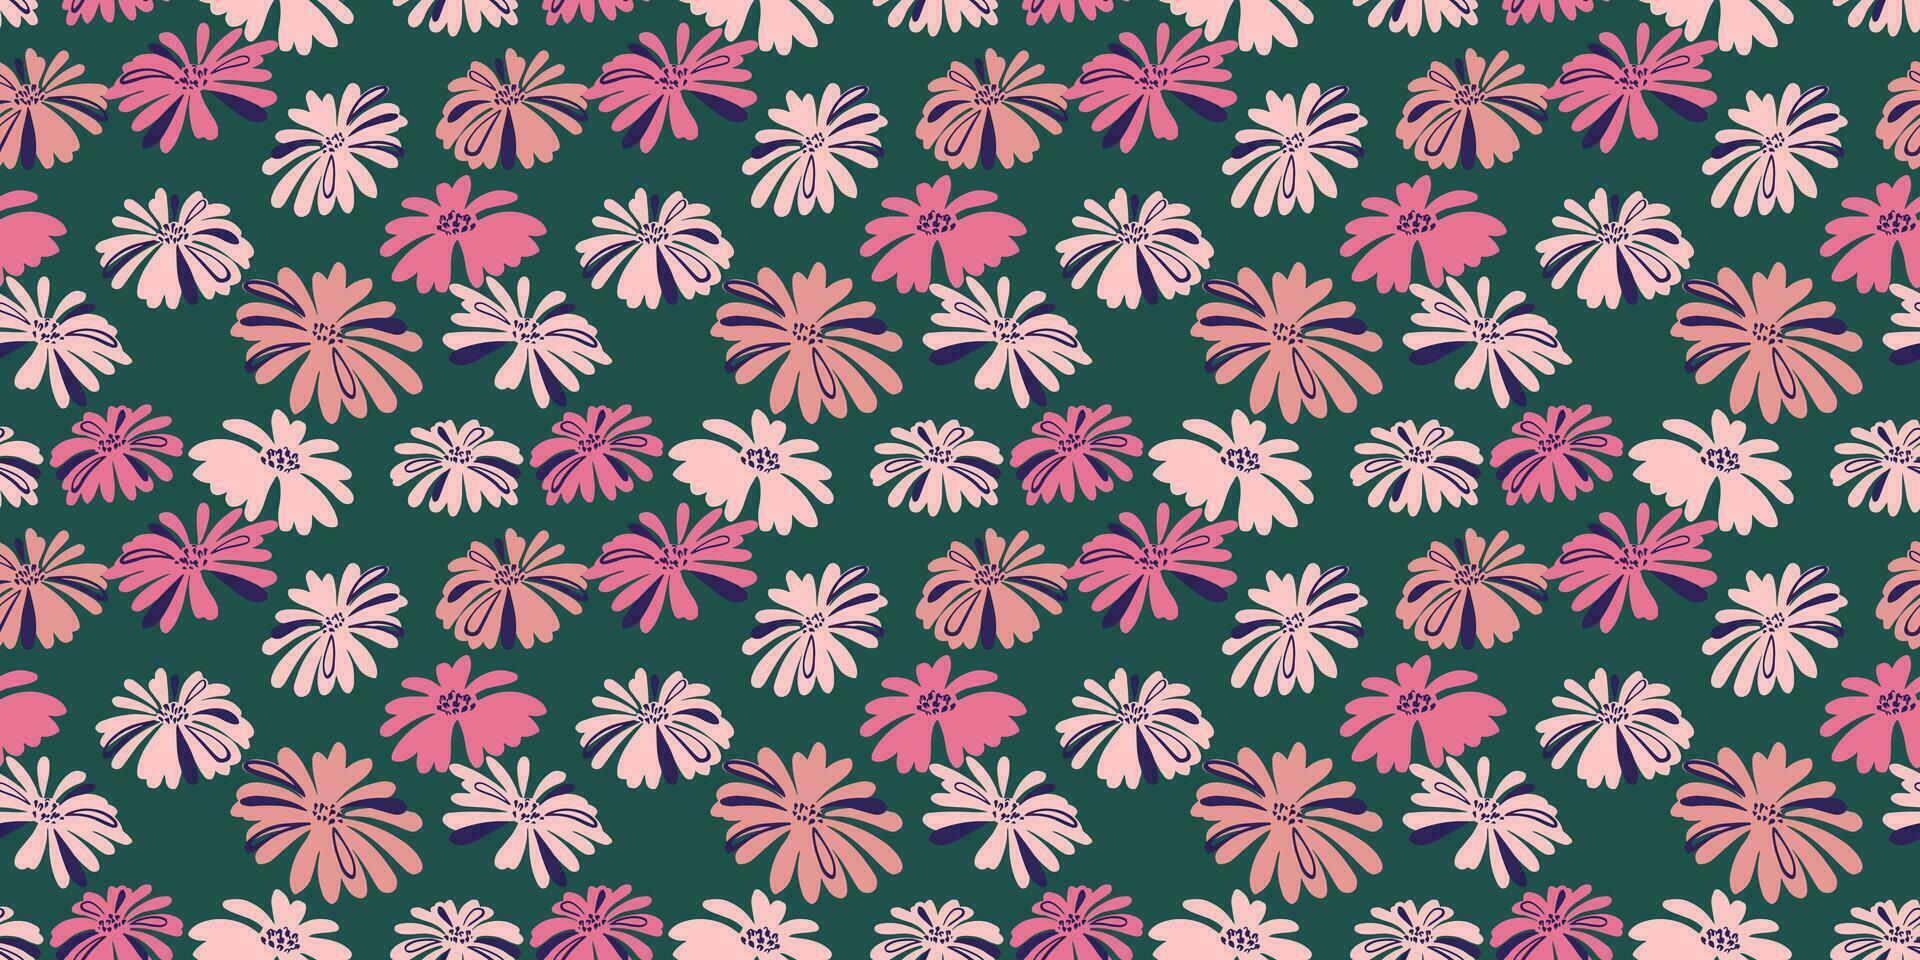 Retro seamless background. Colorful summer pattern. Hand-drawn trendy, abstract, simple shape  flowers on a green background. Vector design ornament for wallpaper, surface design, fashion, fabric